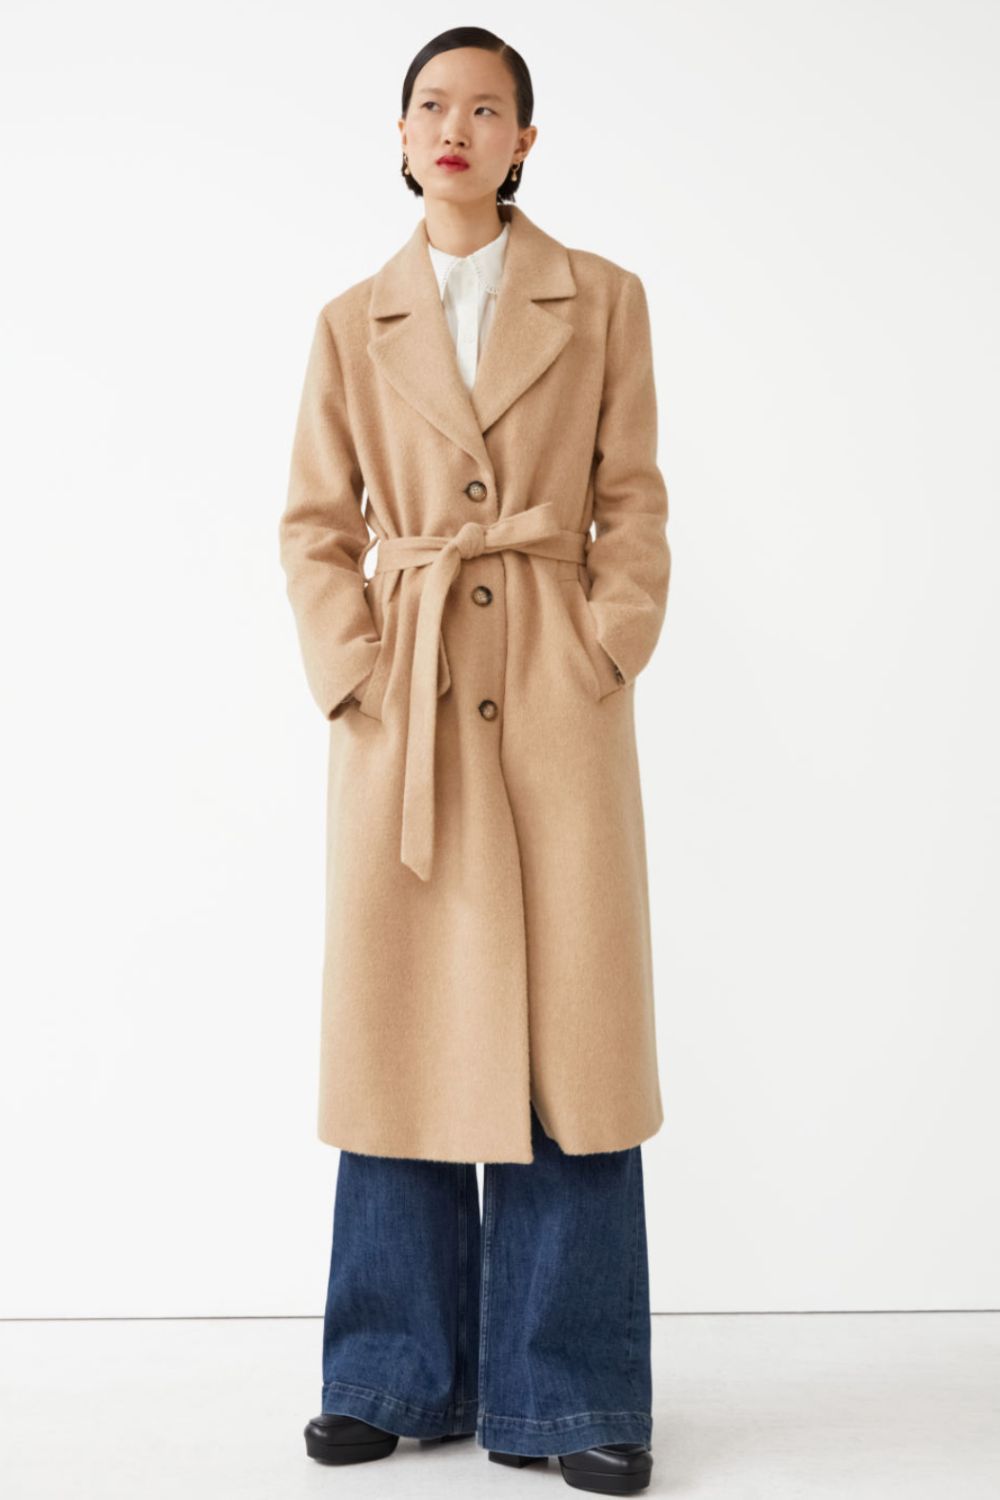 The best camel coats to keep you warm all year round | Marie Claire UK